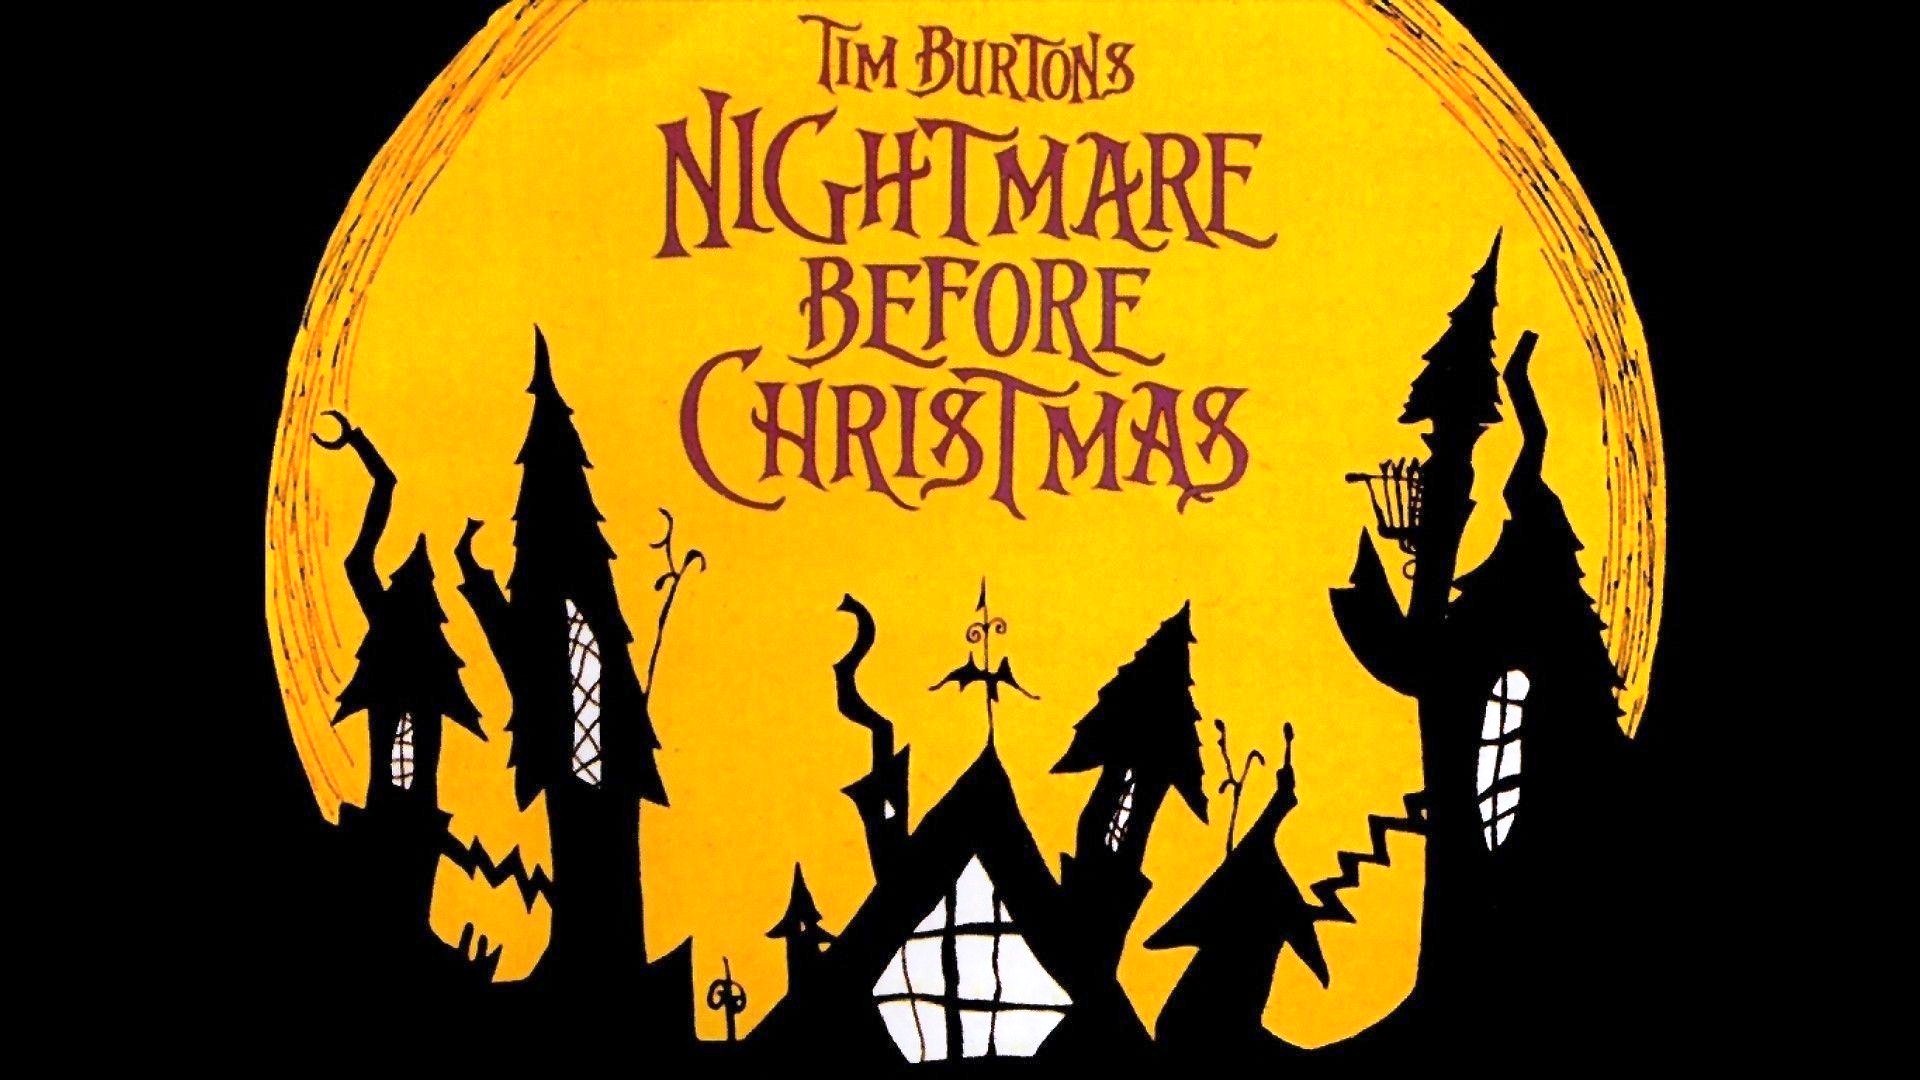 Nightmare Before Christmas Full Movie Wallpaper with high-resolution 1920x1080 pixel. You can use this poster wallpaper for your Desktop Computers, Mac Screensavers, Windows Backgrounds, iPhone Wallpapers, Tablet or Android Lock screen and another Mobile device